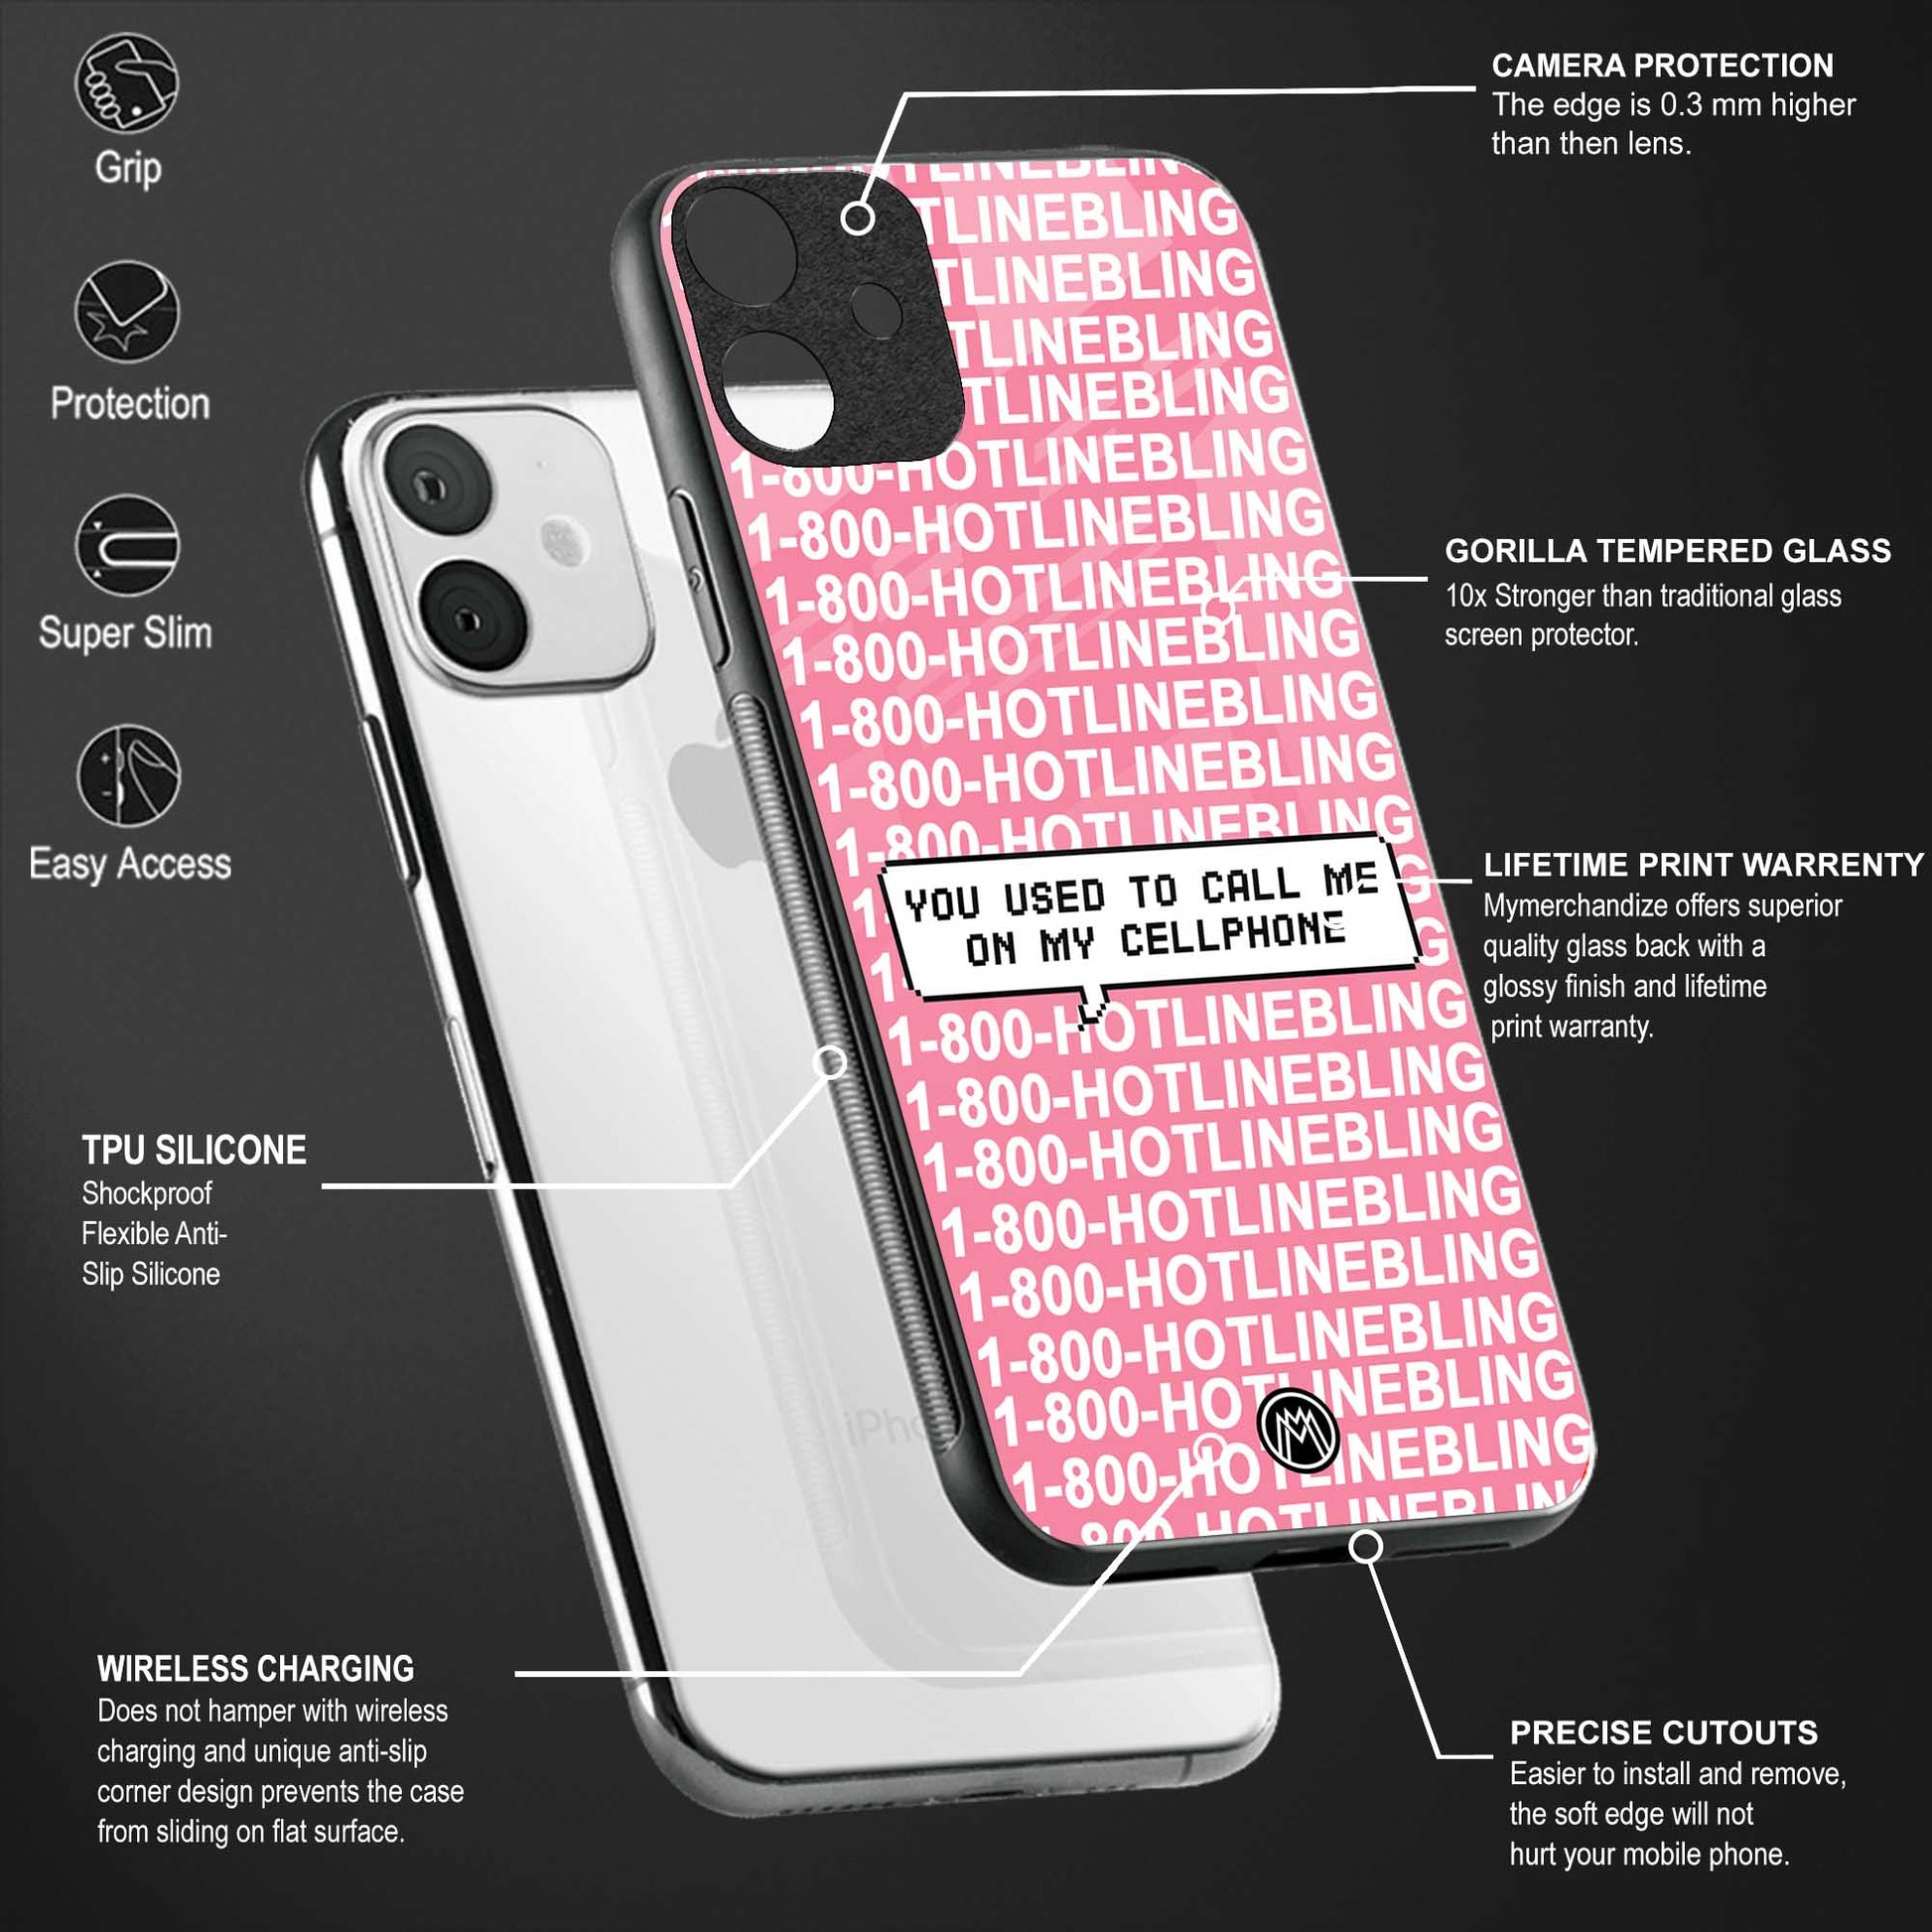 1800 hotline bling phone cover for iphone 6s 